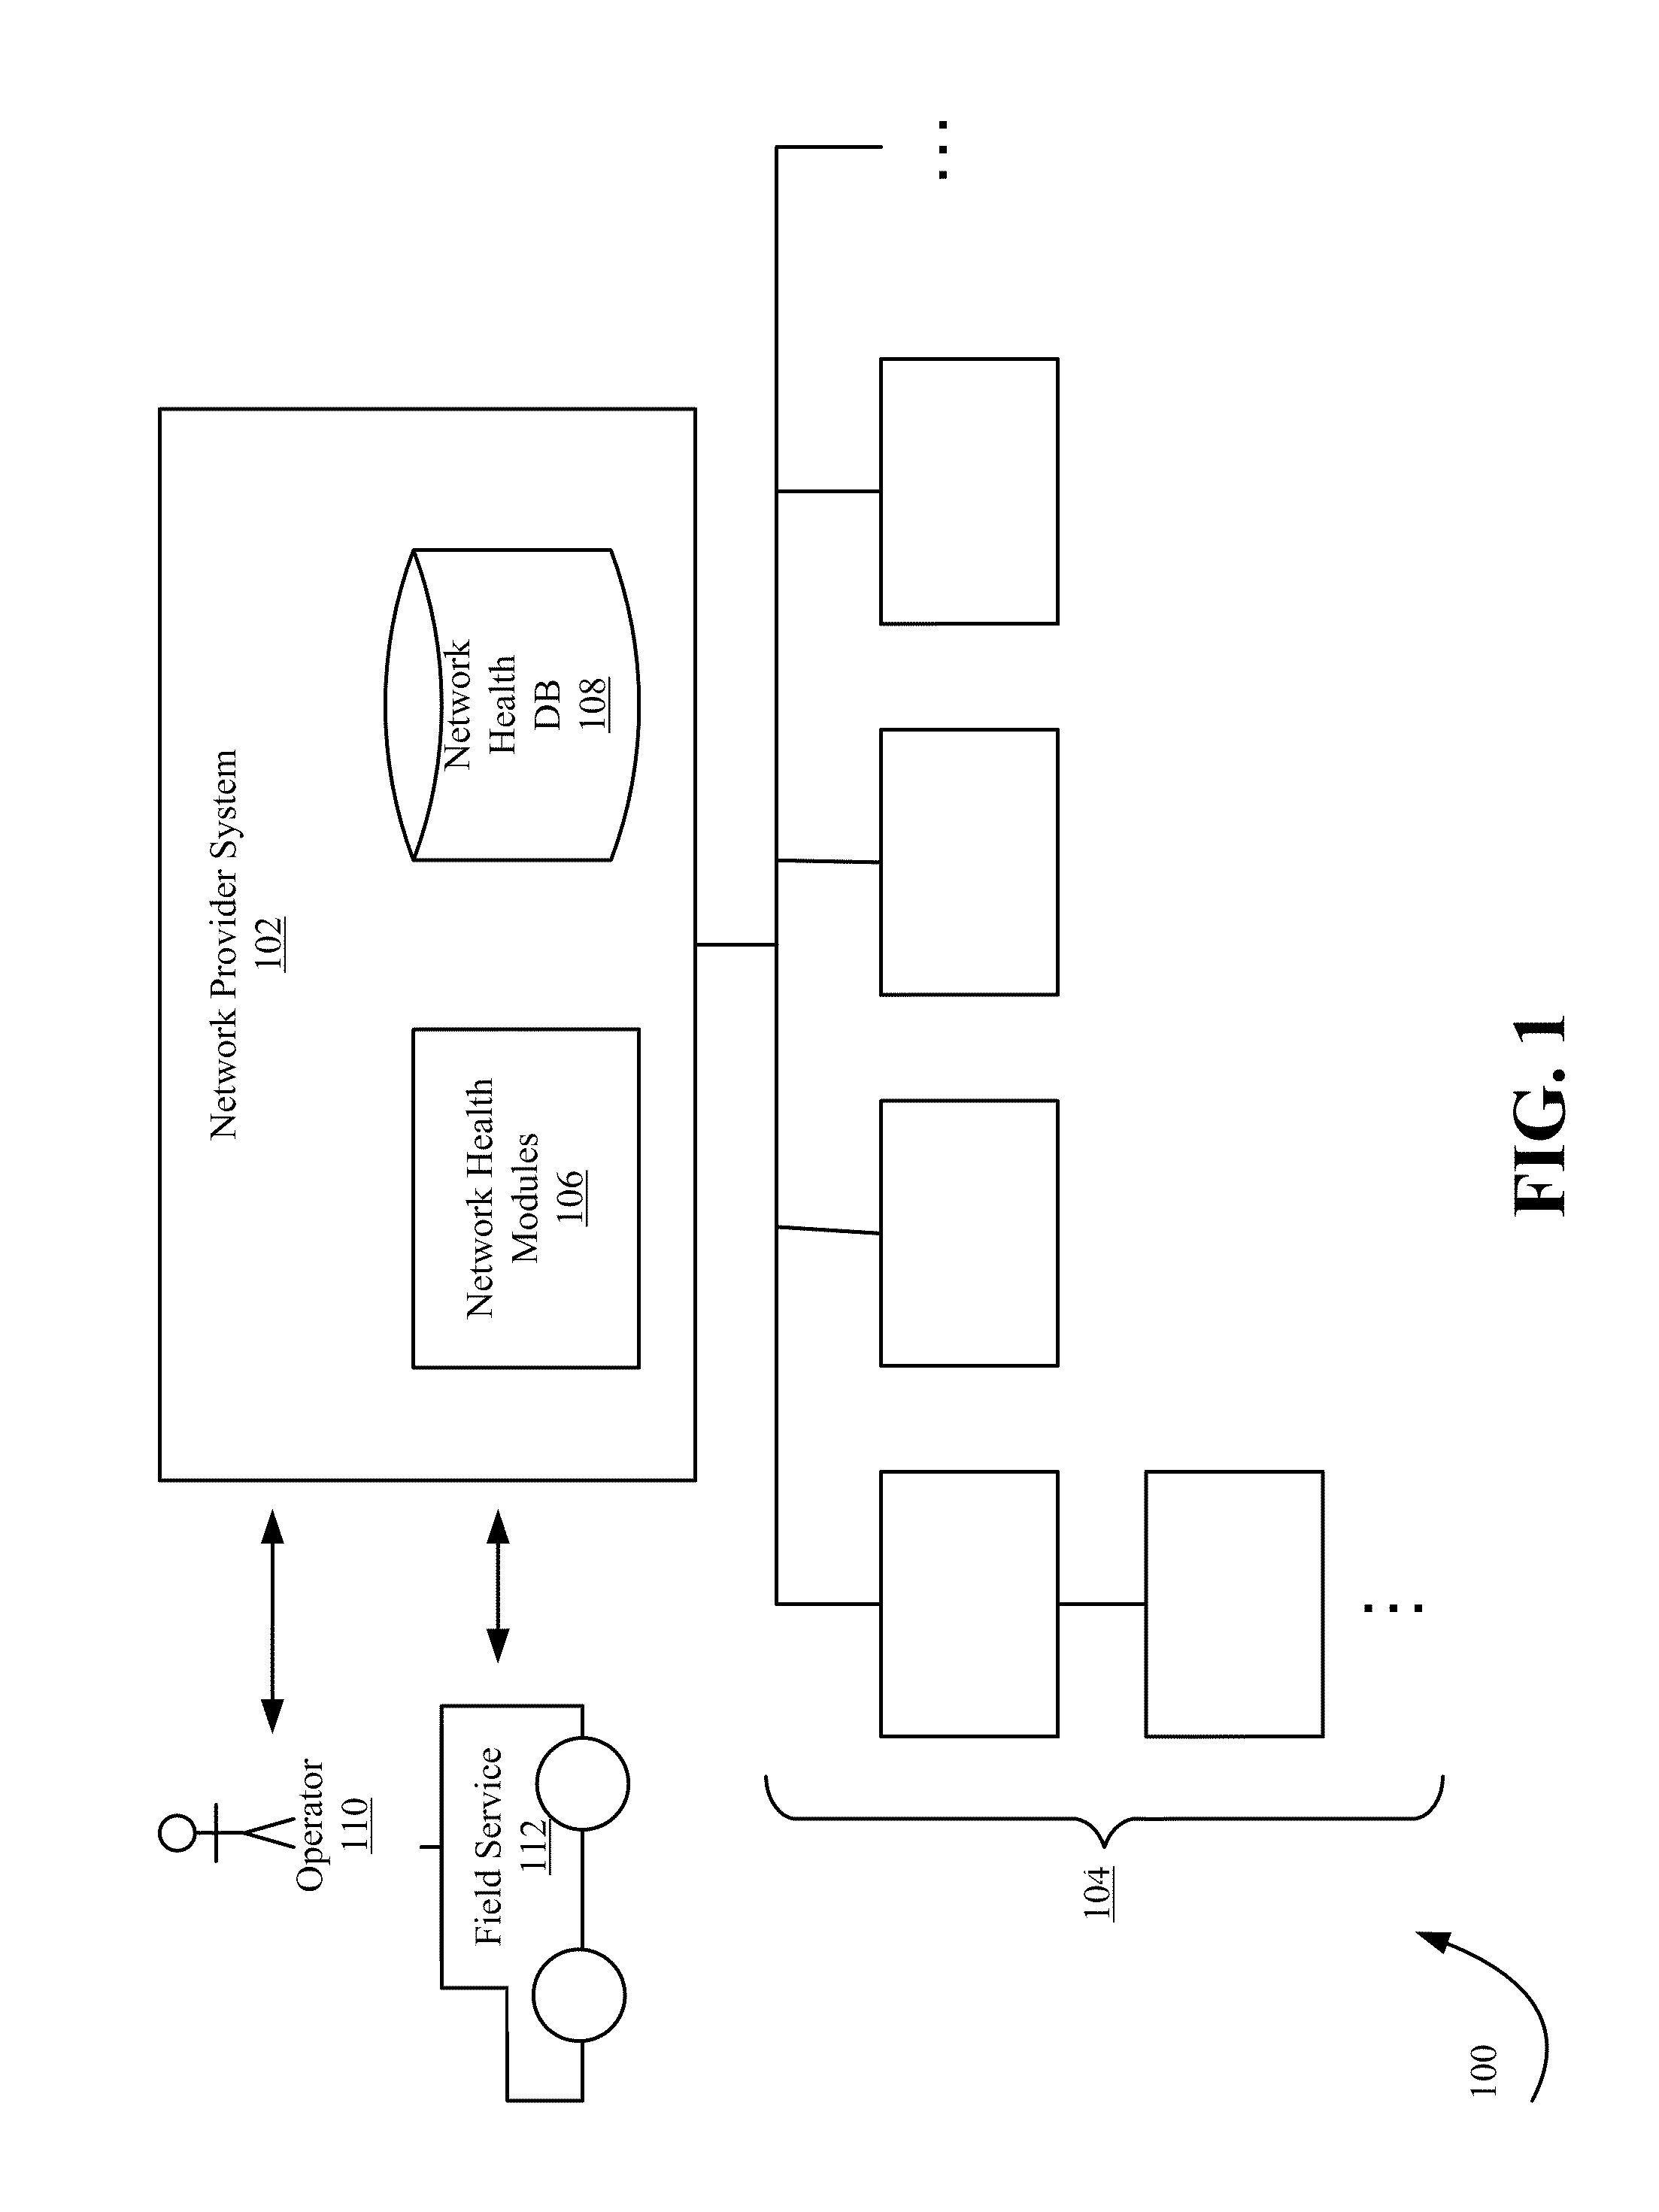 Systems and Methods for Locating Power Network Failures on a Network